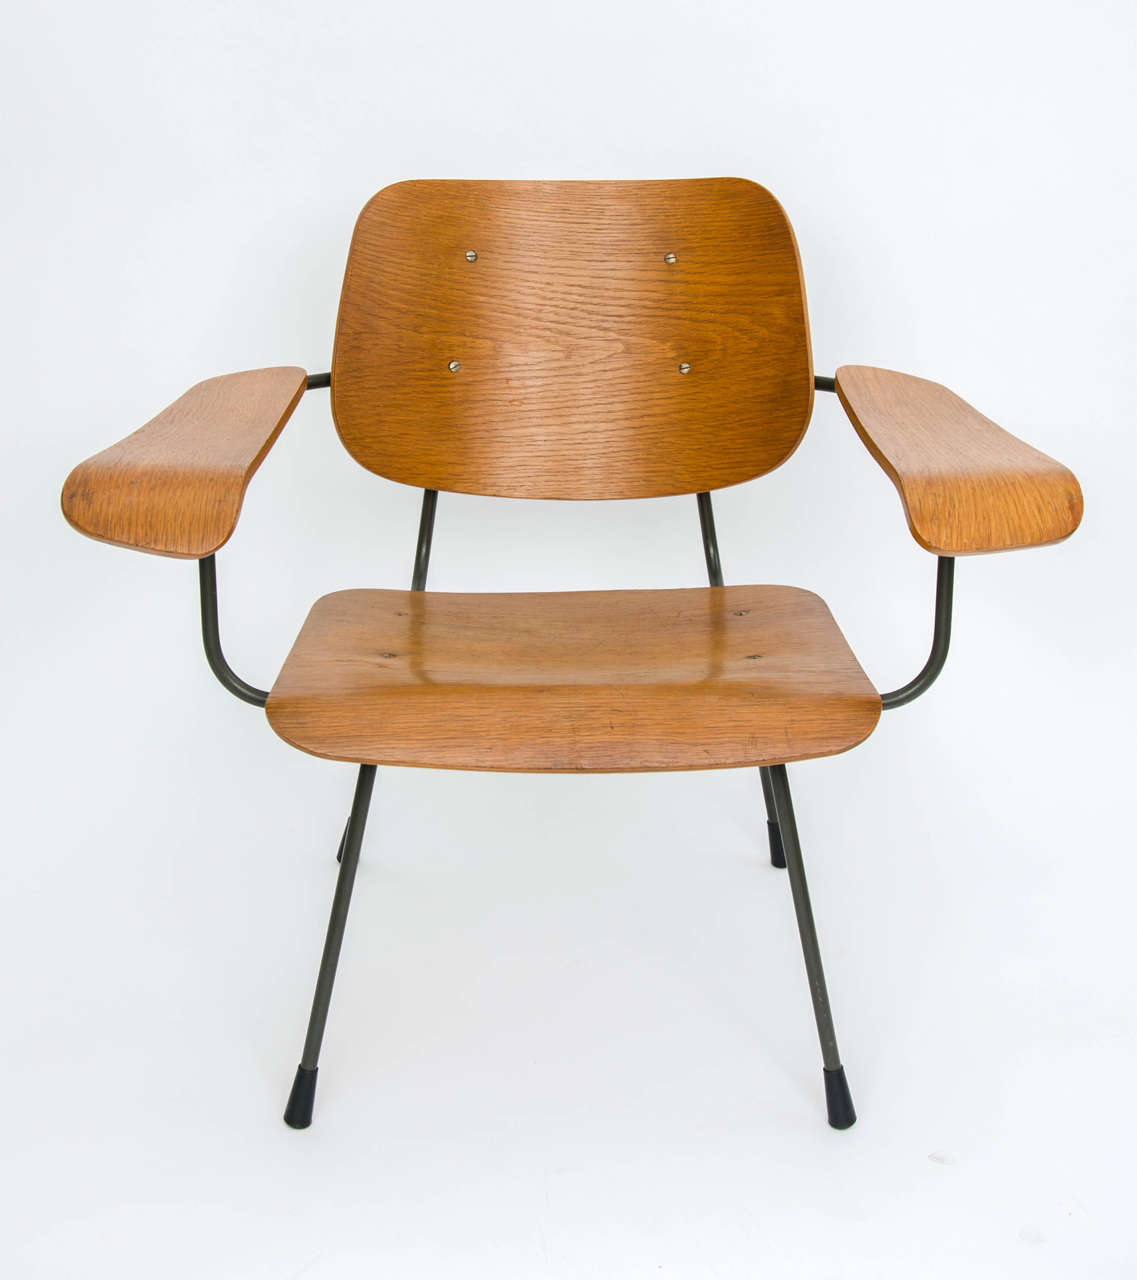 Bent ply lounge chair - model 8000 - by Tjerk Reijenga for Pilastro, Netherlands 1960s.

Rarely seen lounge chair with plywood seat and back panel screwed to a grey/brown steel frame. The striking sculptural form and compact size belie a very